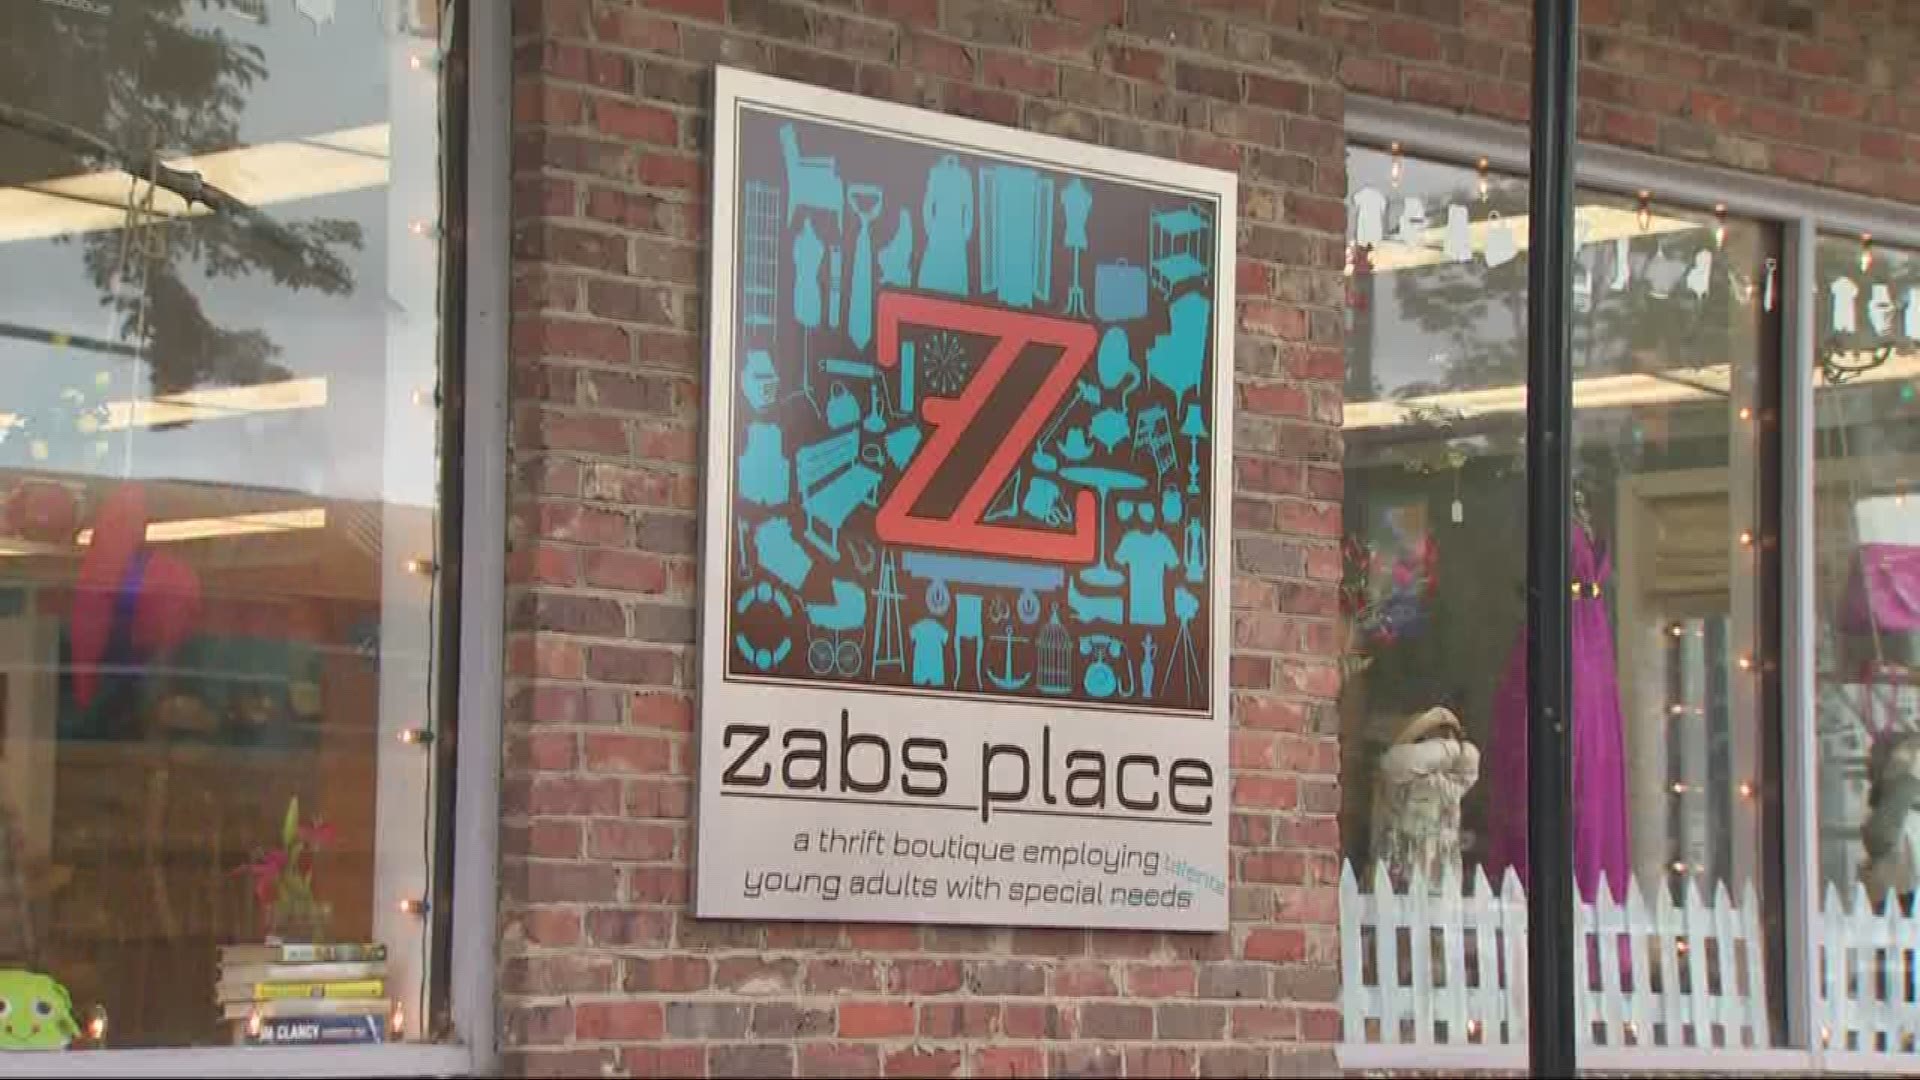 See what else makes Zab's Place special